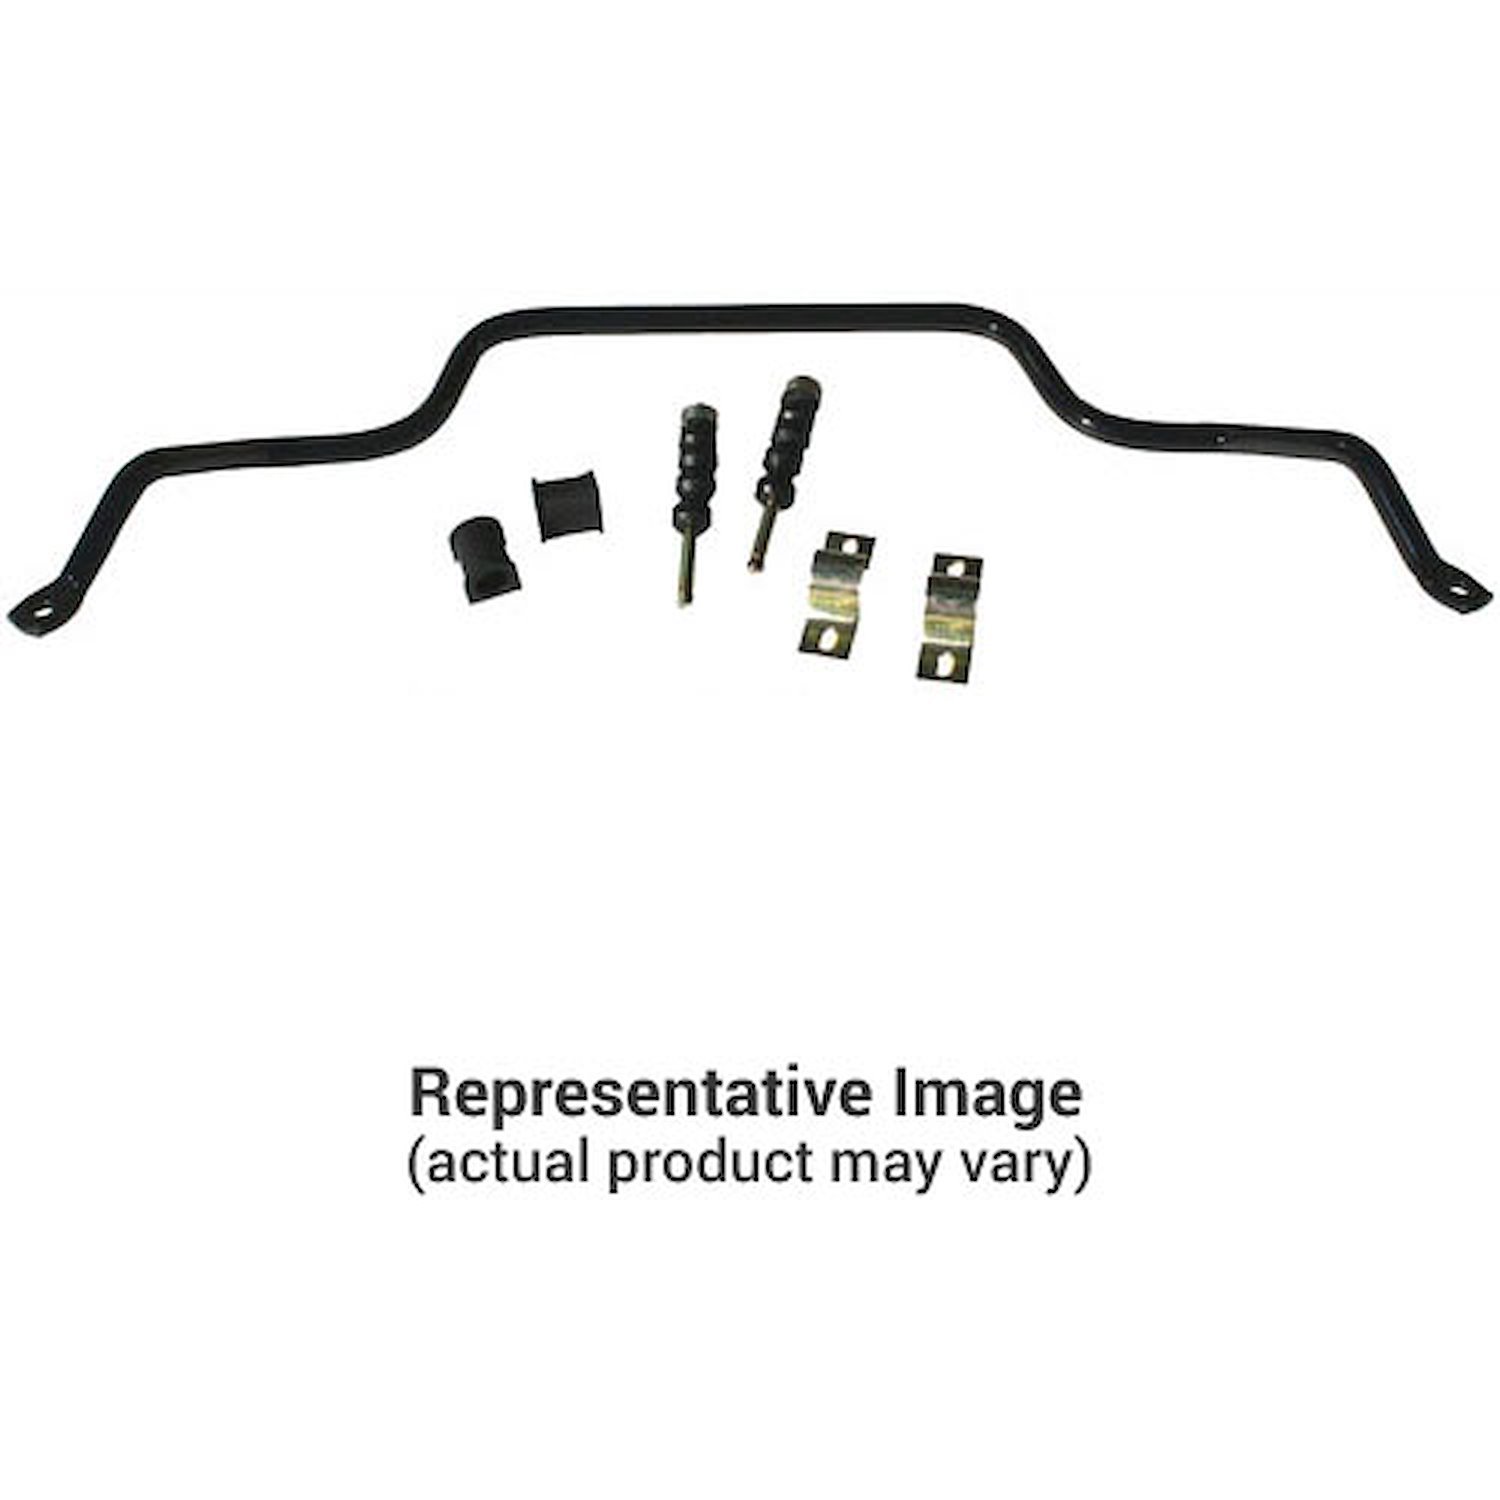 1 1/2" Front Sway Bar 1998-01 Ford Explorer